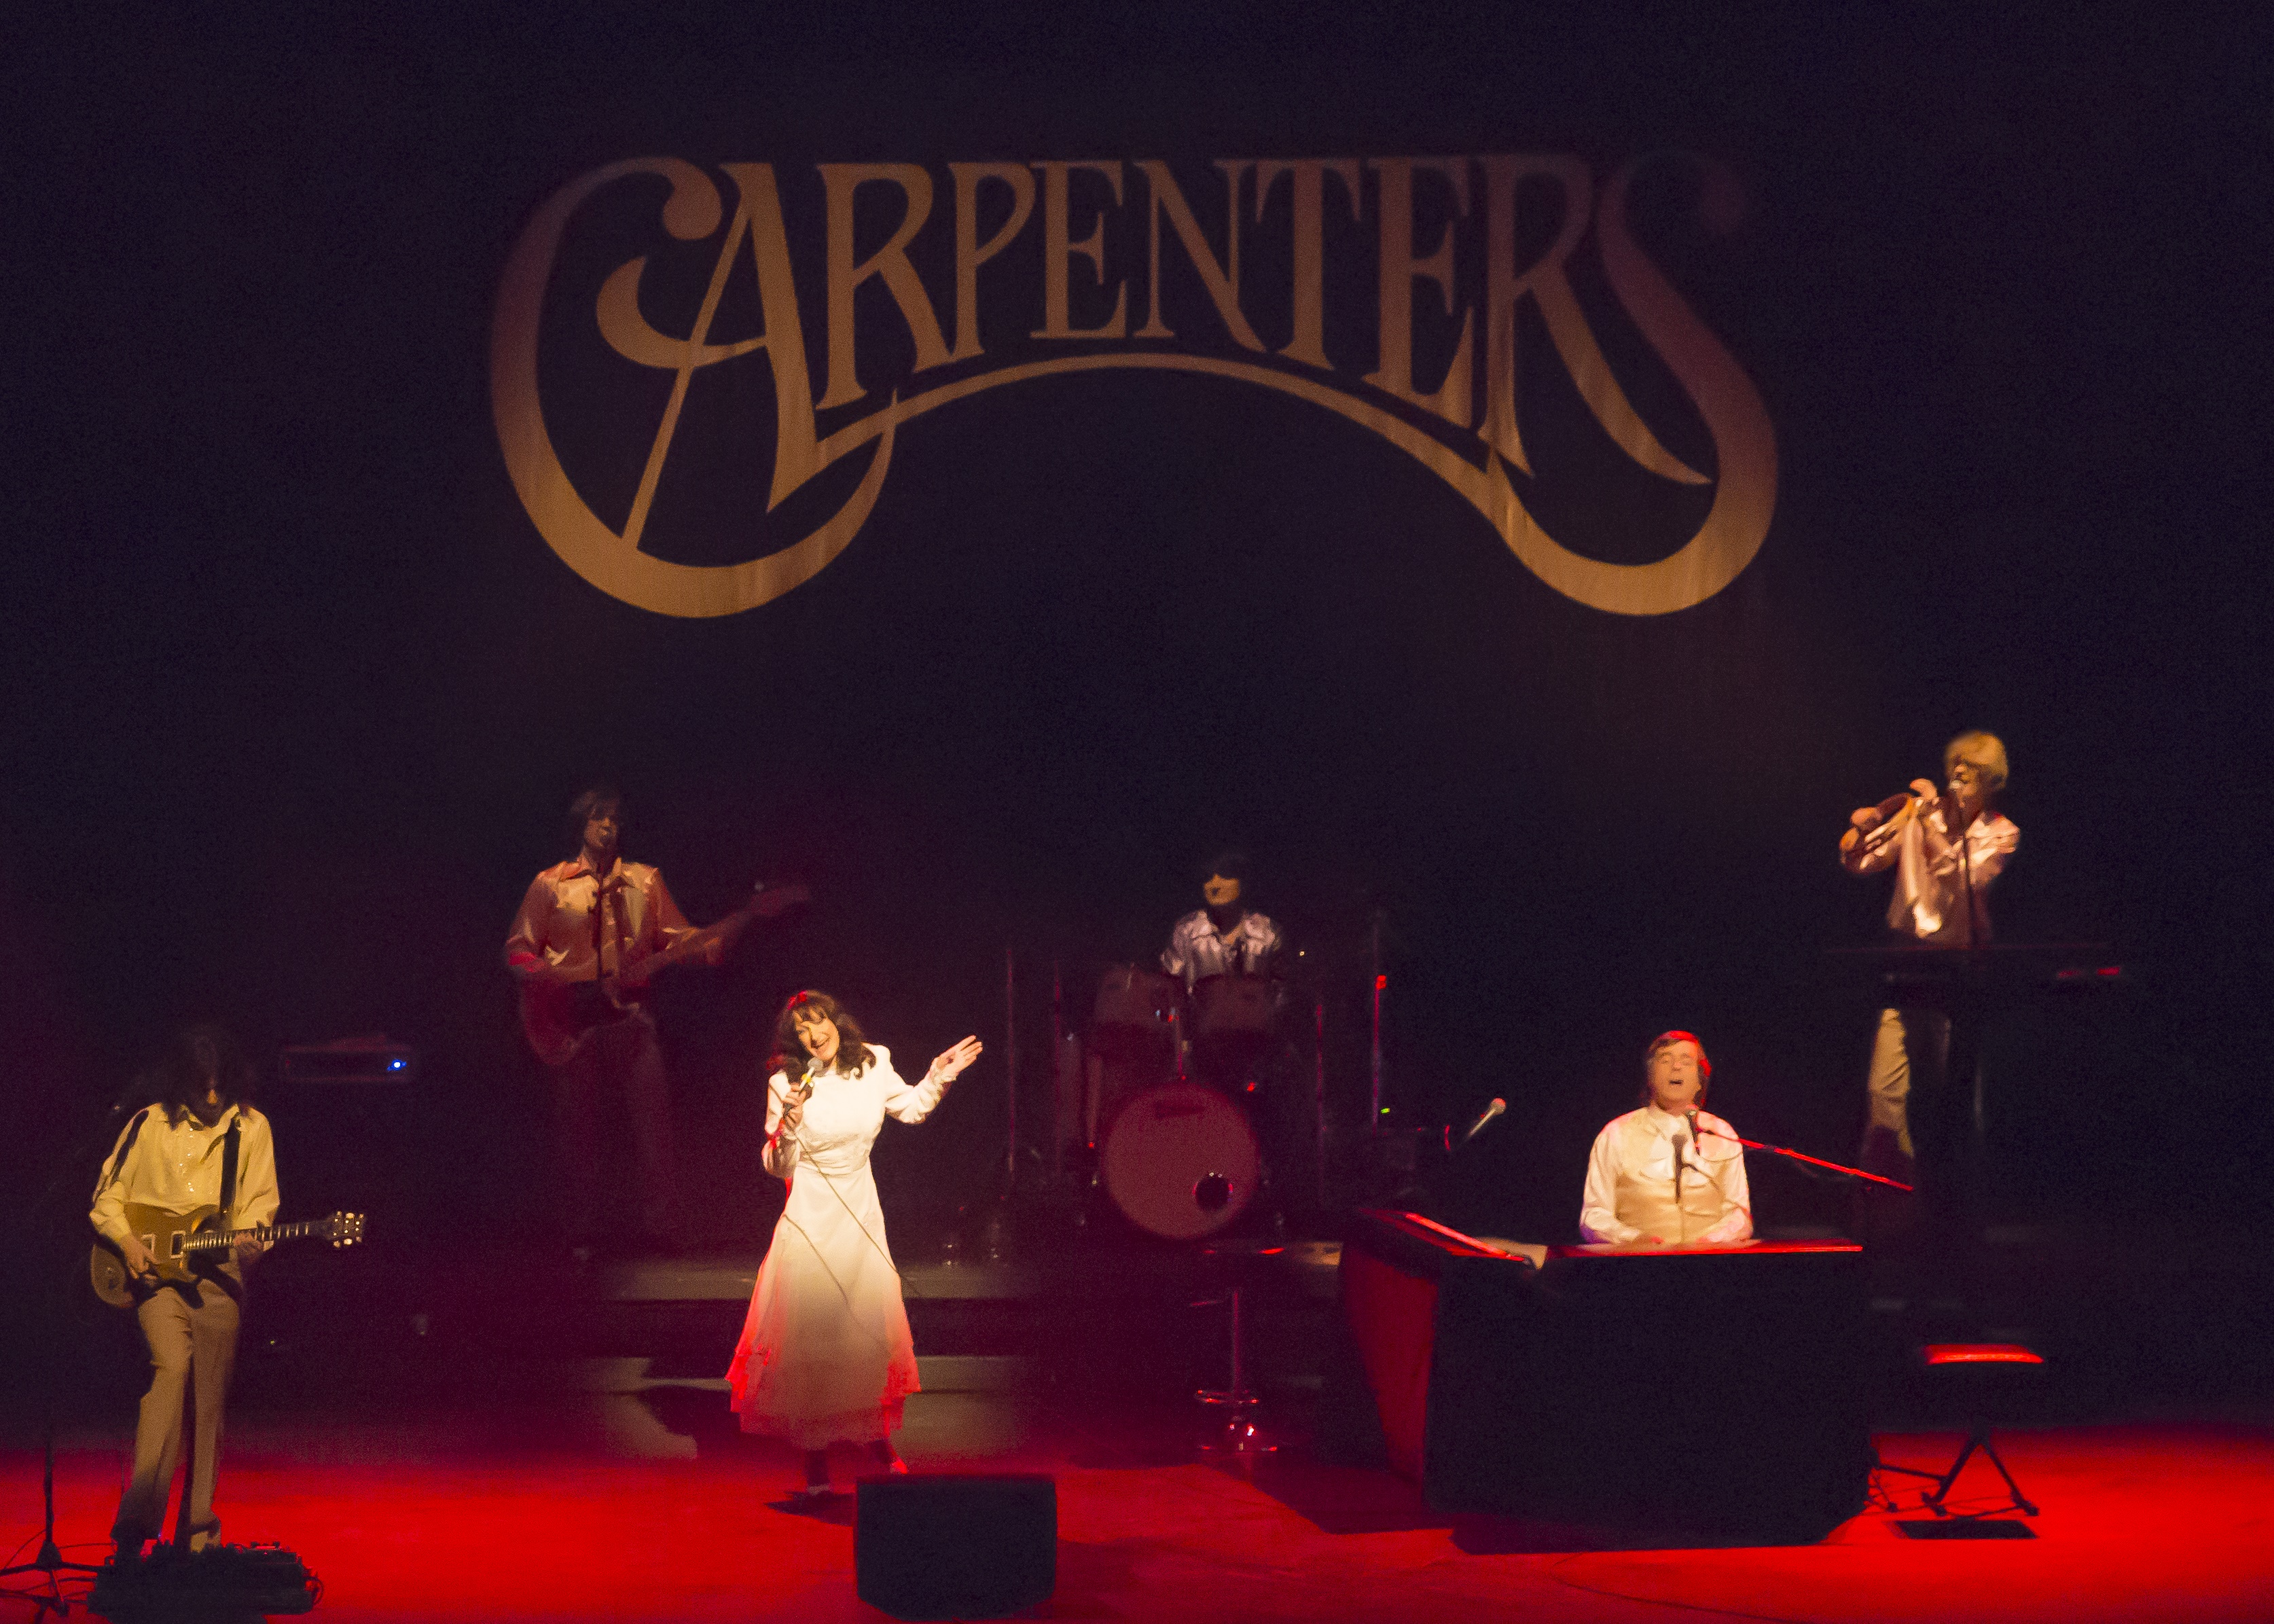 Experience a little Carpenters’ Gold